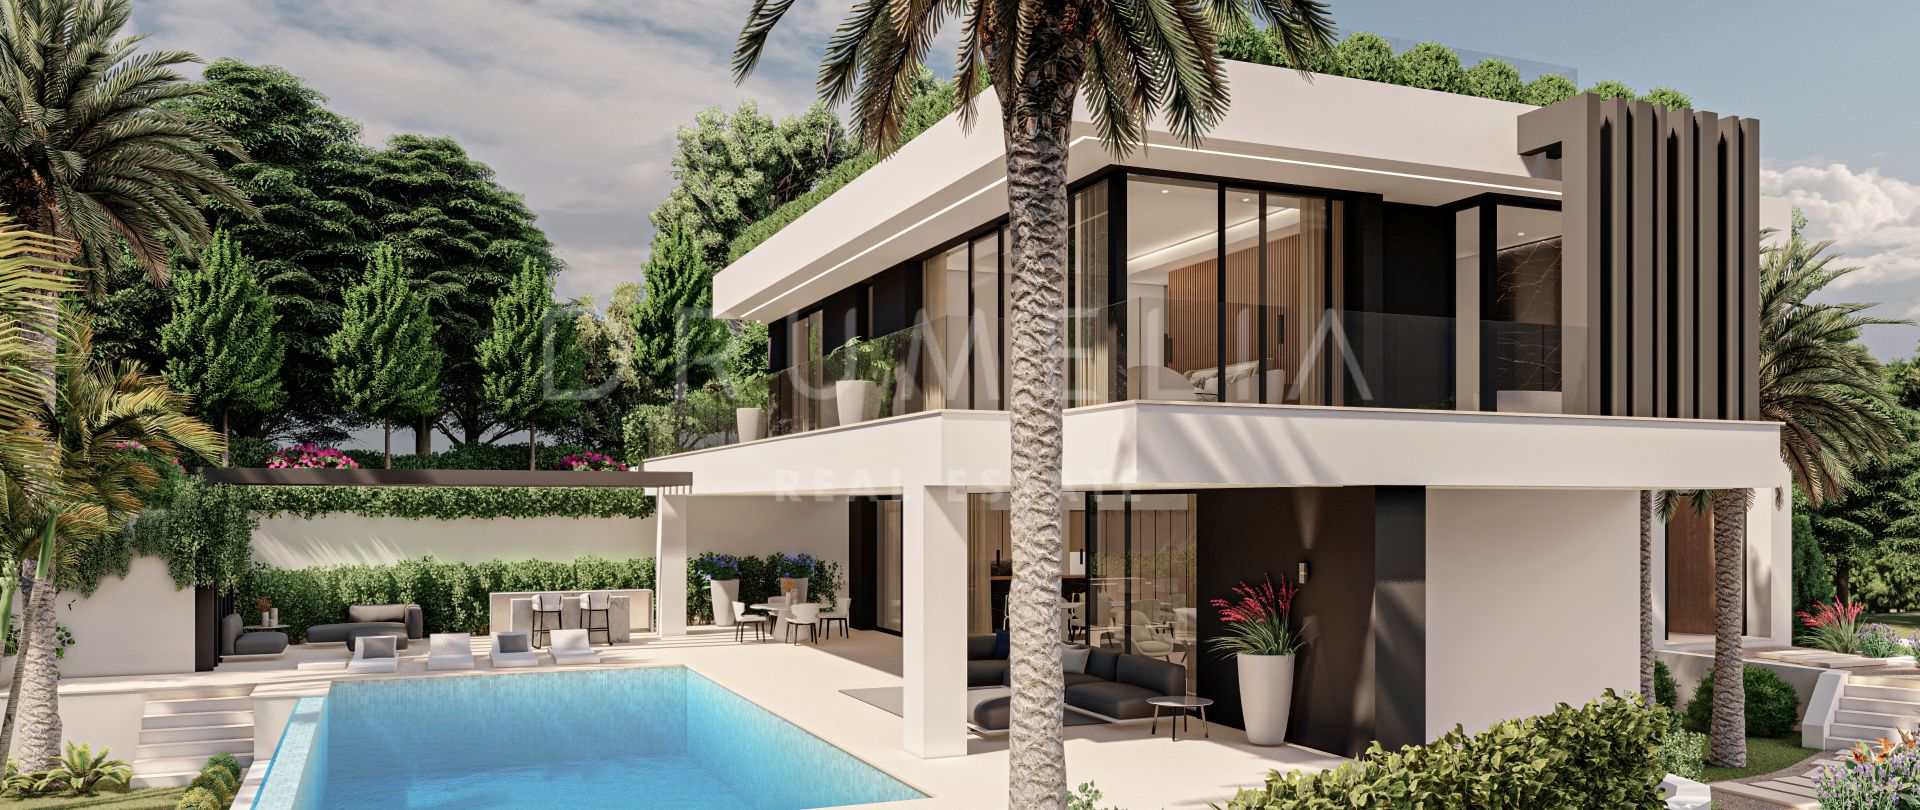 Magnificent project of 3 luxurious brand-new modern villas on Marbella's Golden Mile